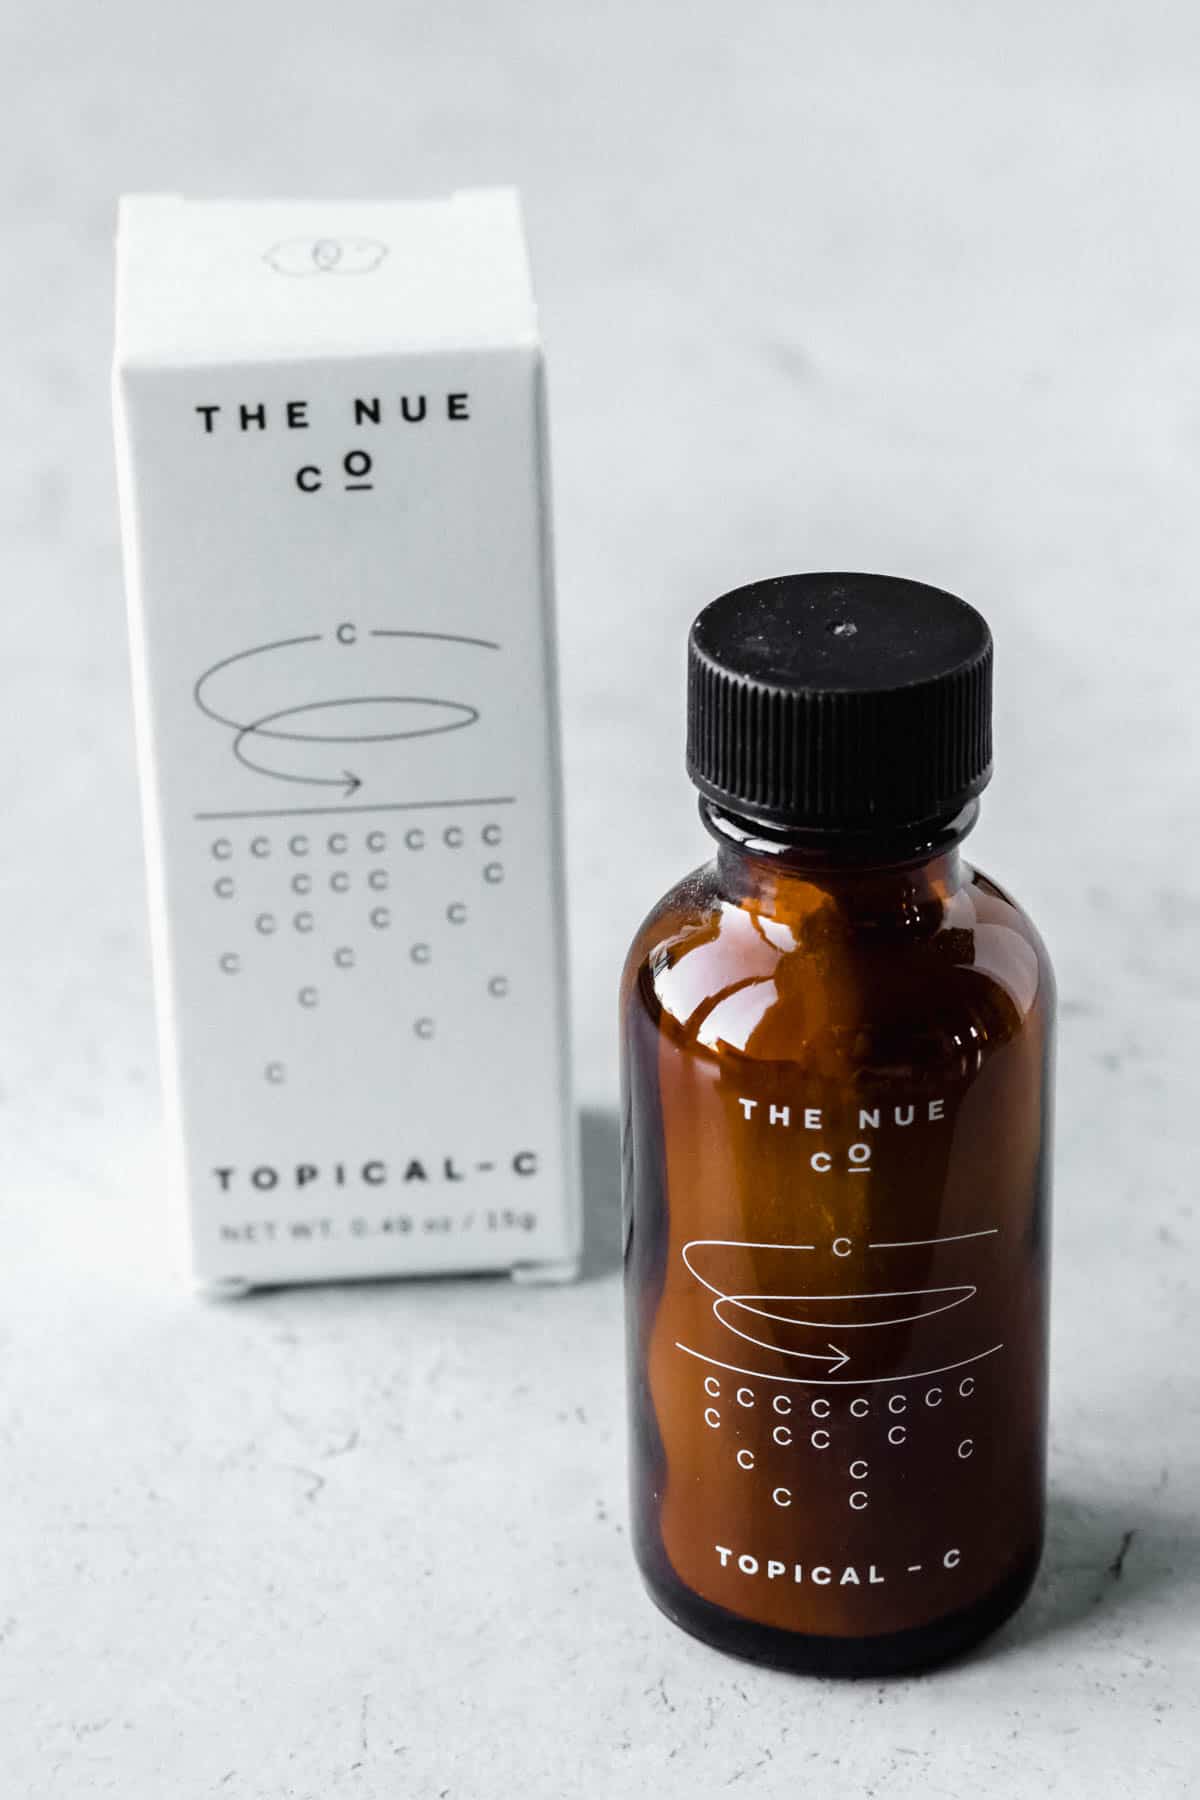 The Nue Co. Topical C bottle and box on a white background